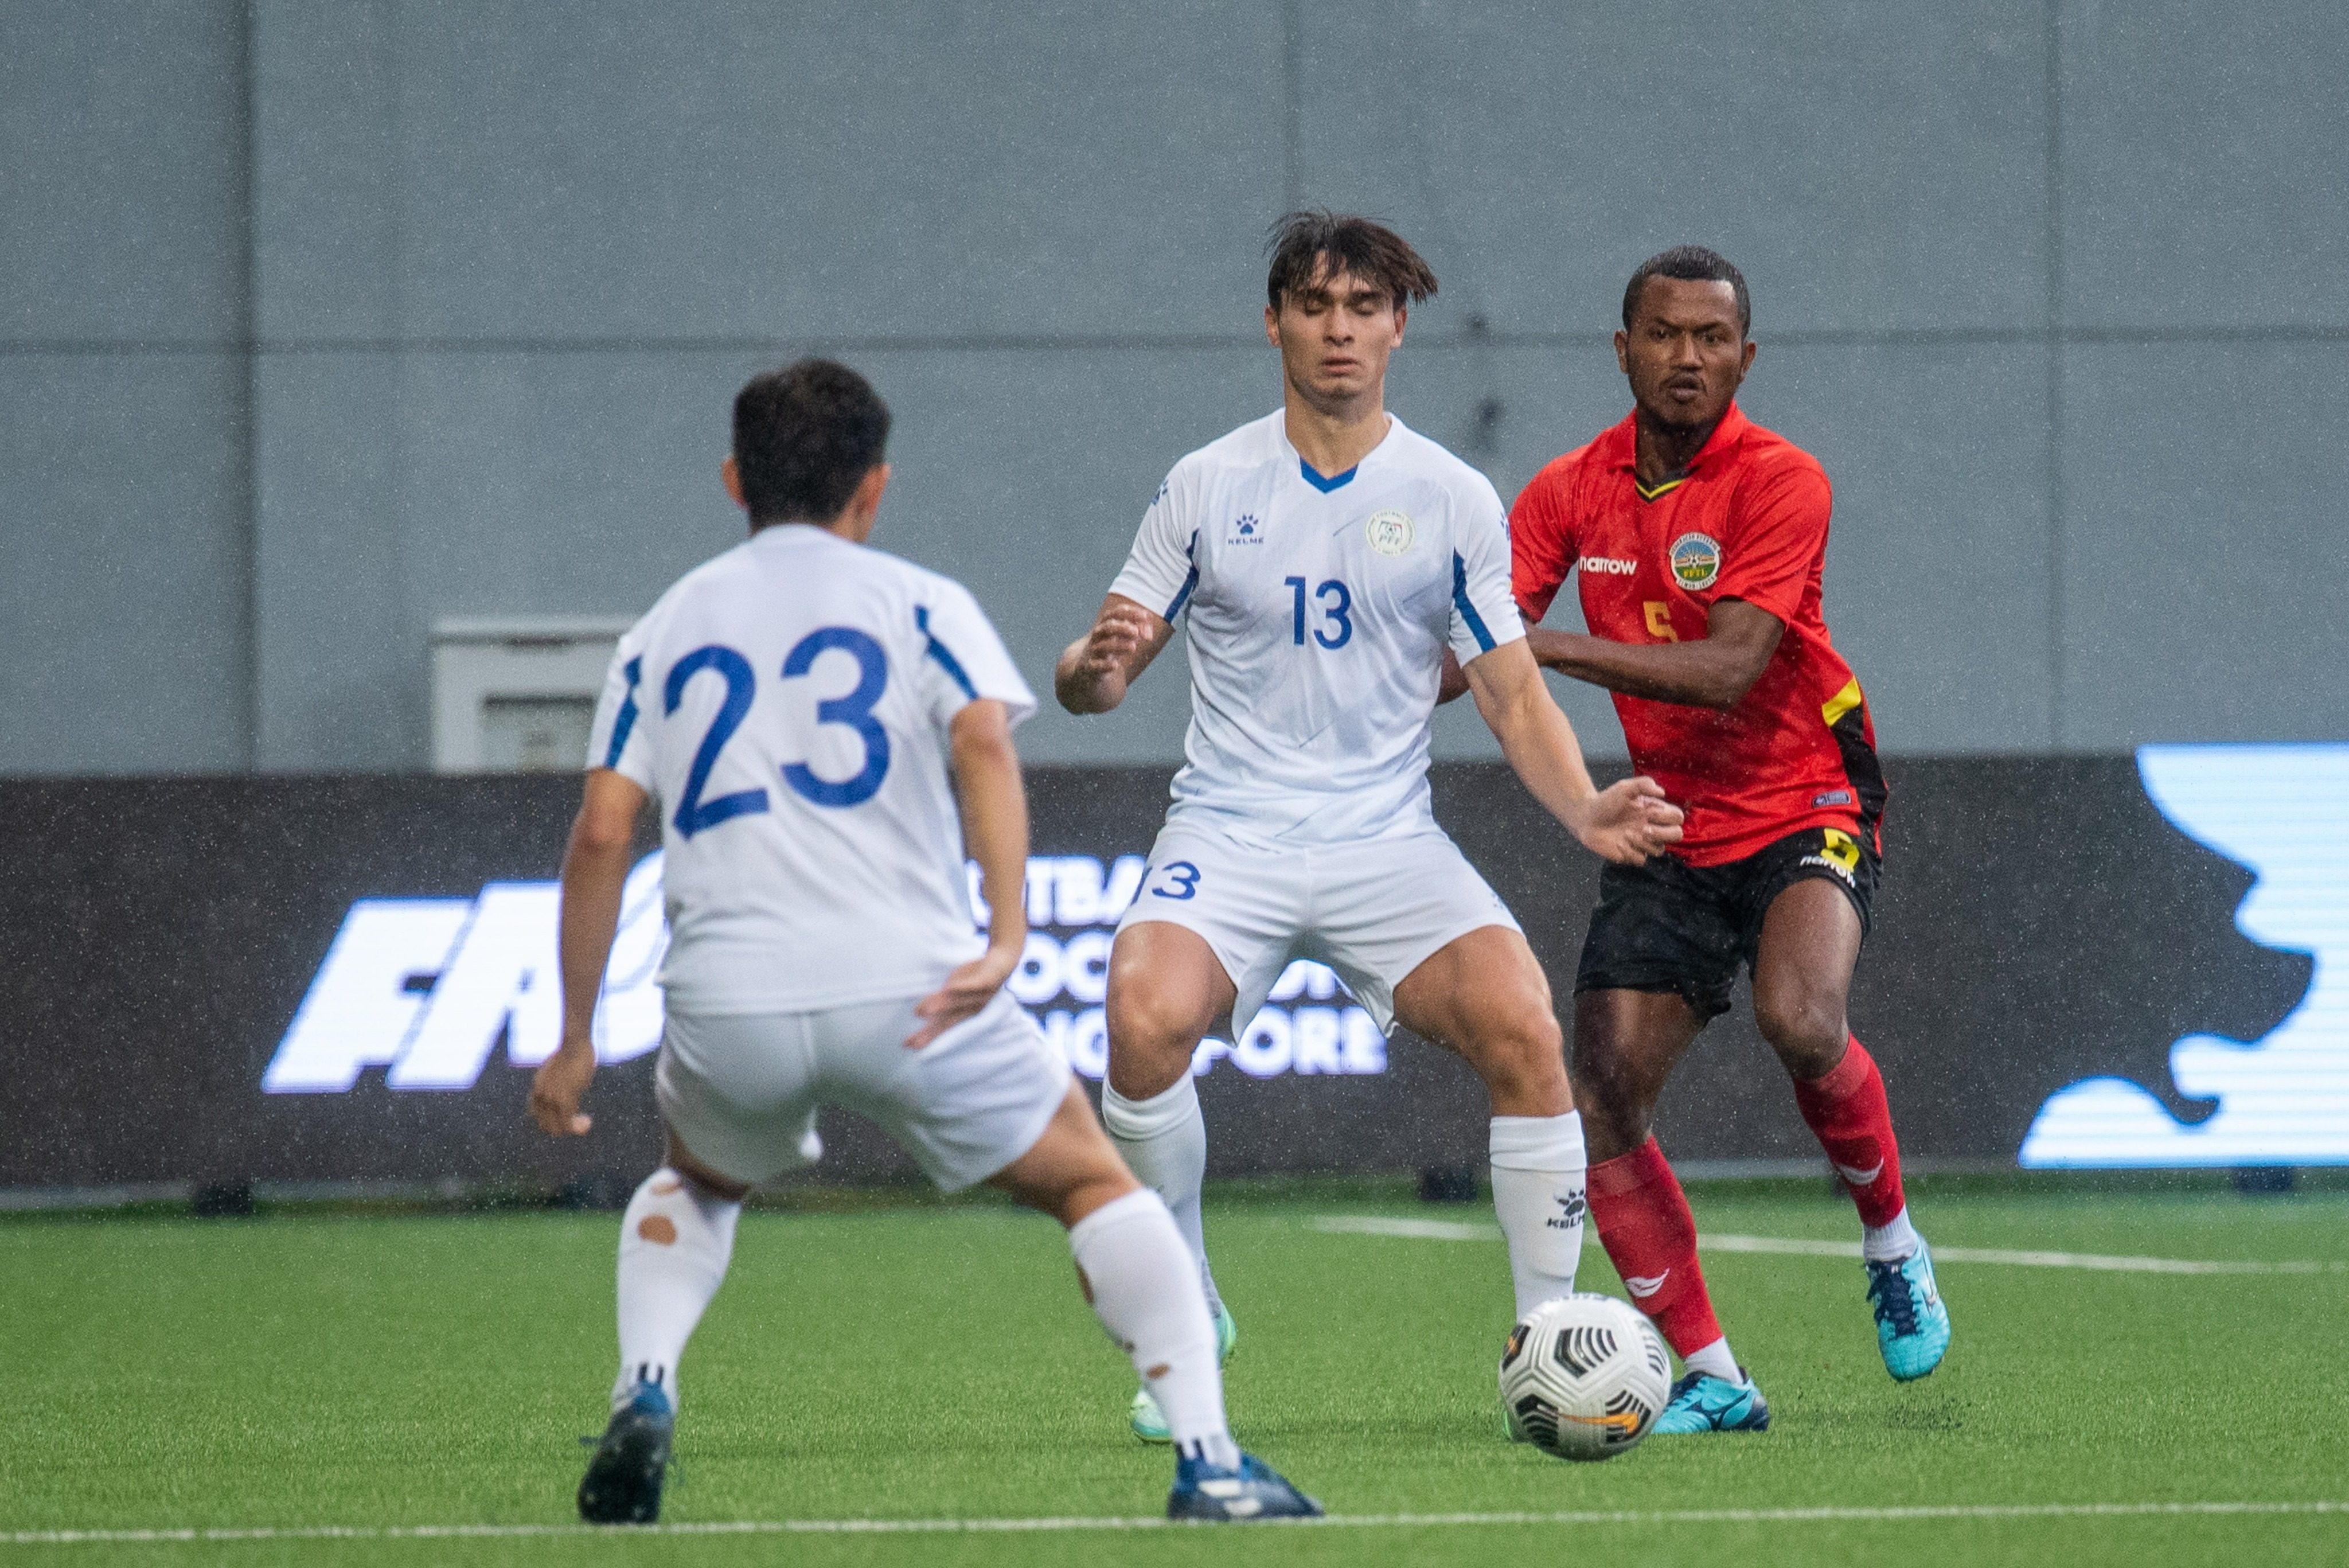 Azkals U23 winless in Asian Cup qualifiers with last-minute loss to Timor Leste